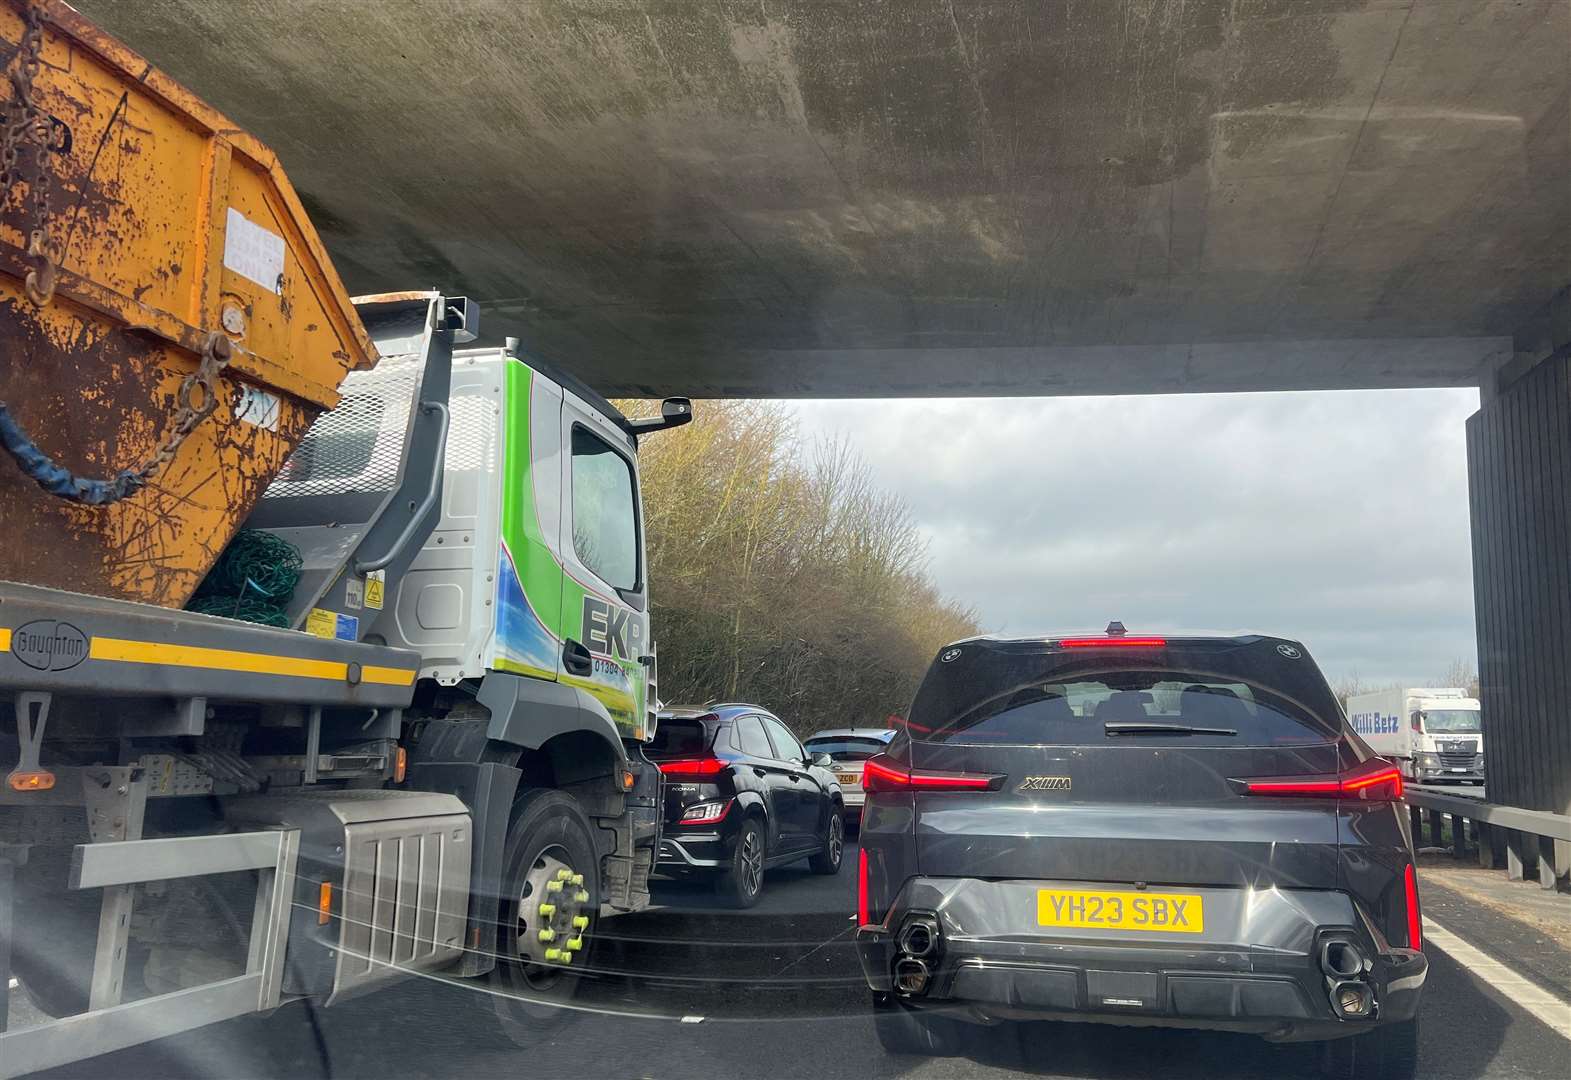 Traffic was temporarily held on the M2 London-bound due to a crash